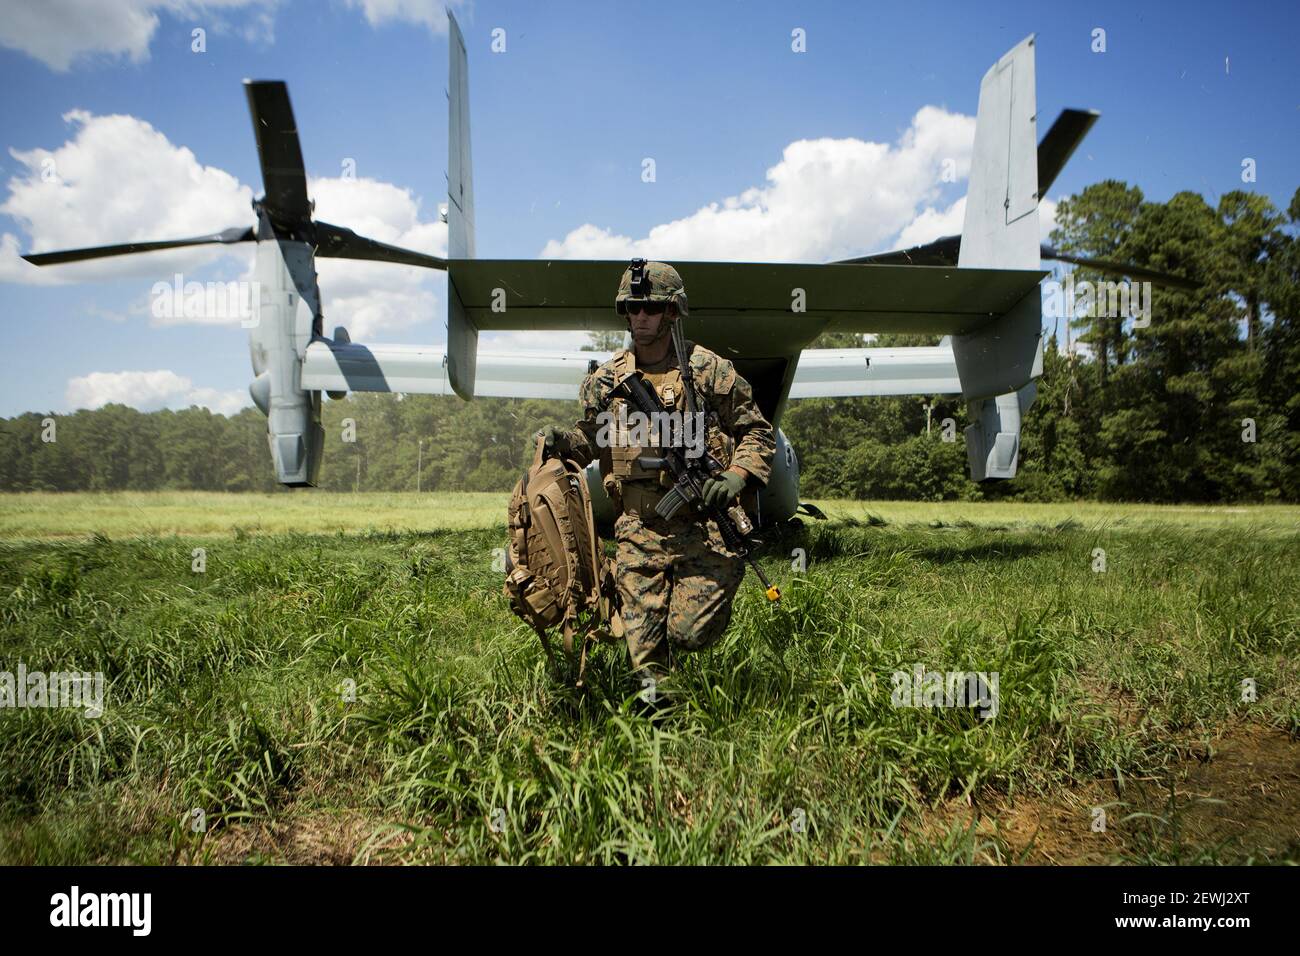 A Marine exits a MV-22 Osprey during a vertical assault raid at Camp Lejeune, N.C., Aug. 23, 2016. The raid was part of their pre deployment training in preparation for the 24th Marine Expeditionary Unit’s upcoming deployment. The Marine is with Lima Company, Battalion Landing Team, 3rd Battalion, 6th Marine Regiment. (Photo by Lance Cpl. Melanye E. Martinez/U.S. Marine Corps)    Please note: Fees charged by the agency are for the agency’s services only, and do not, nor are they intended to, convey to the user any ownership of Copyright or License in the material. The agency does not claim any Stock Photo